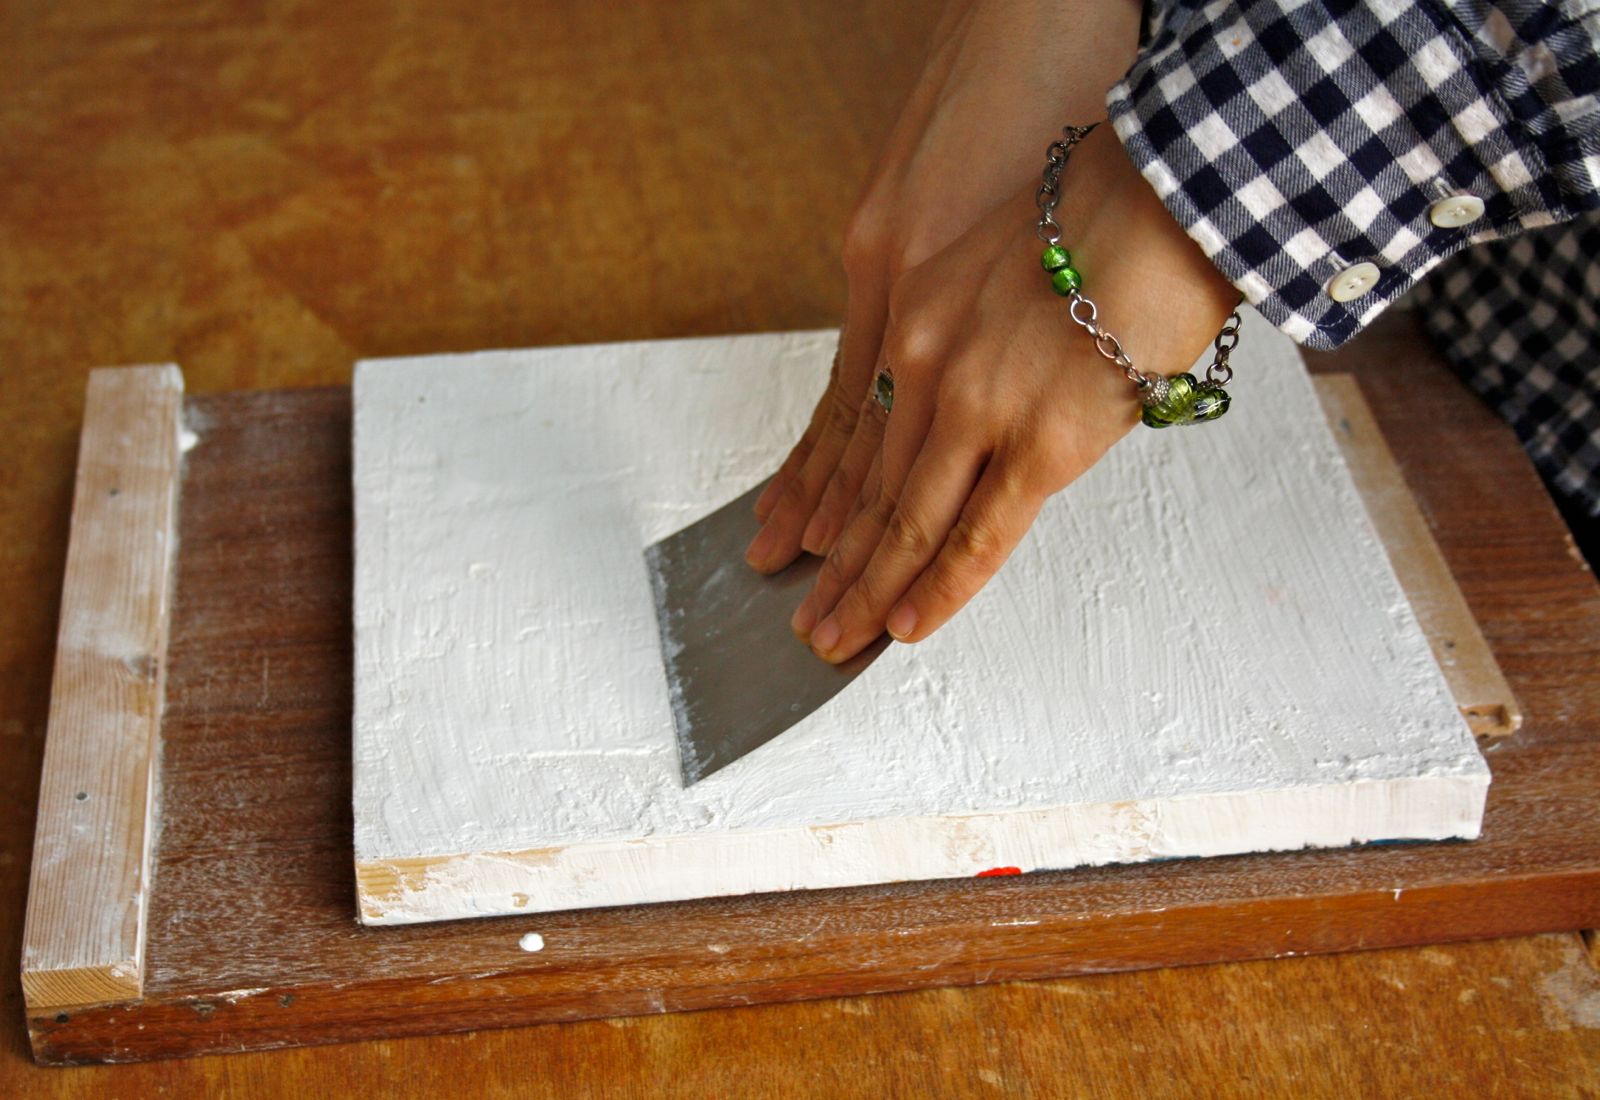 Scraping the gesso smooth using a metal scraper